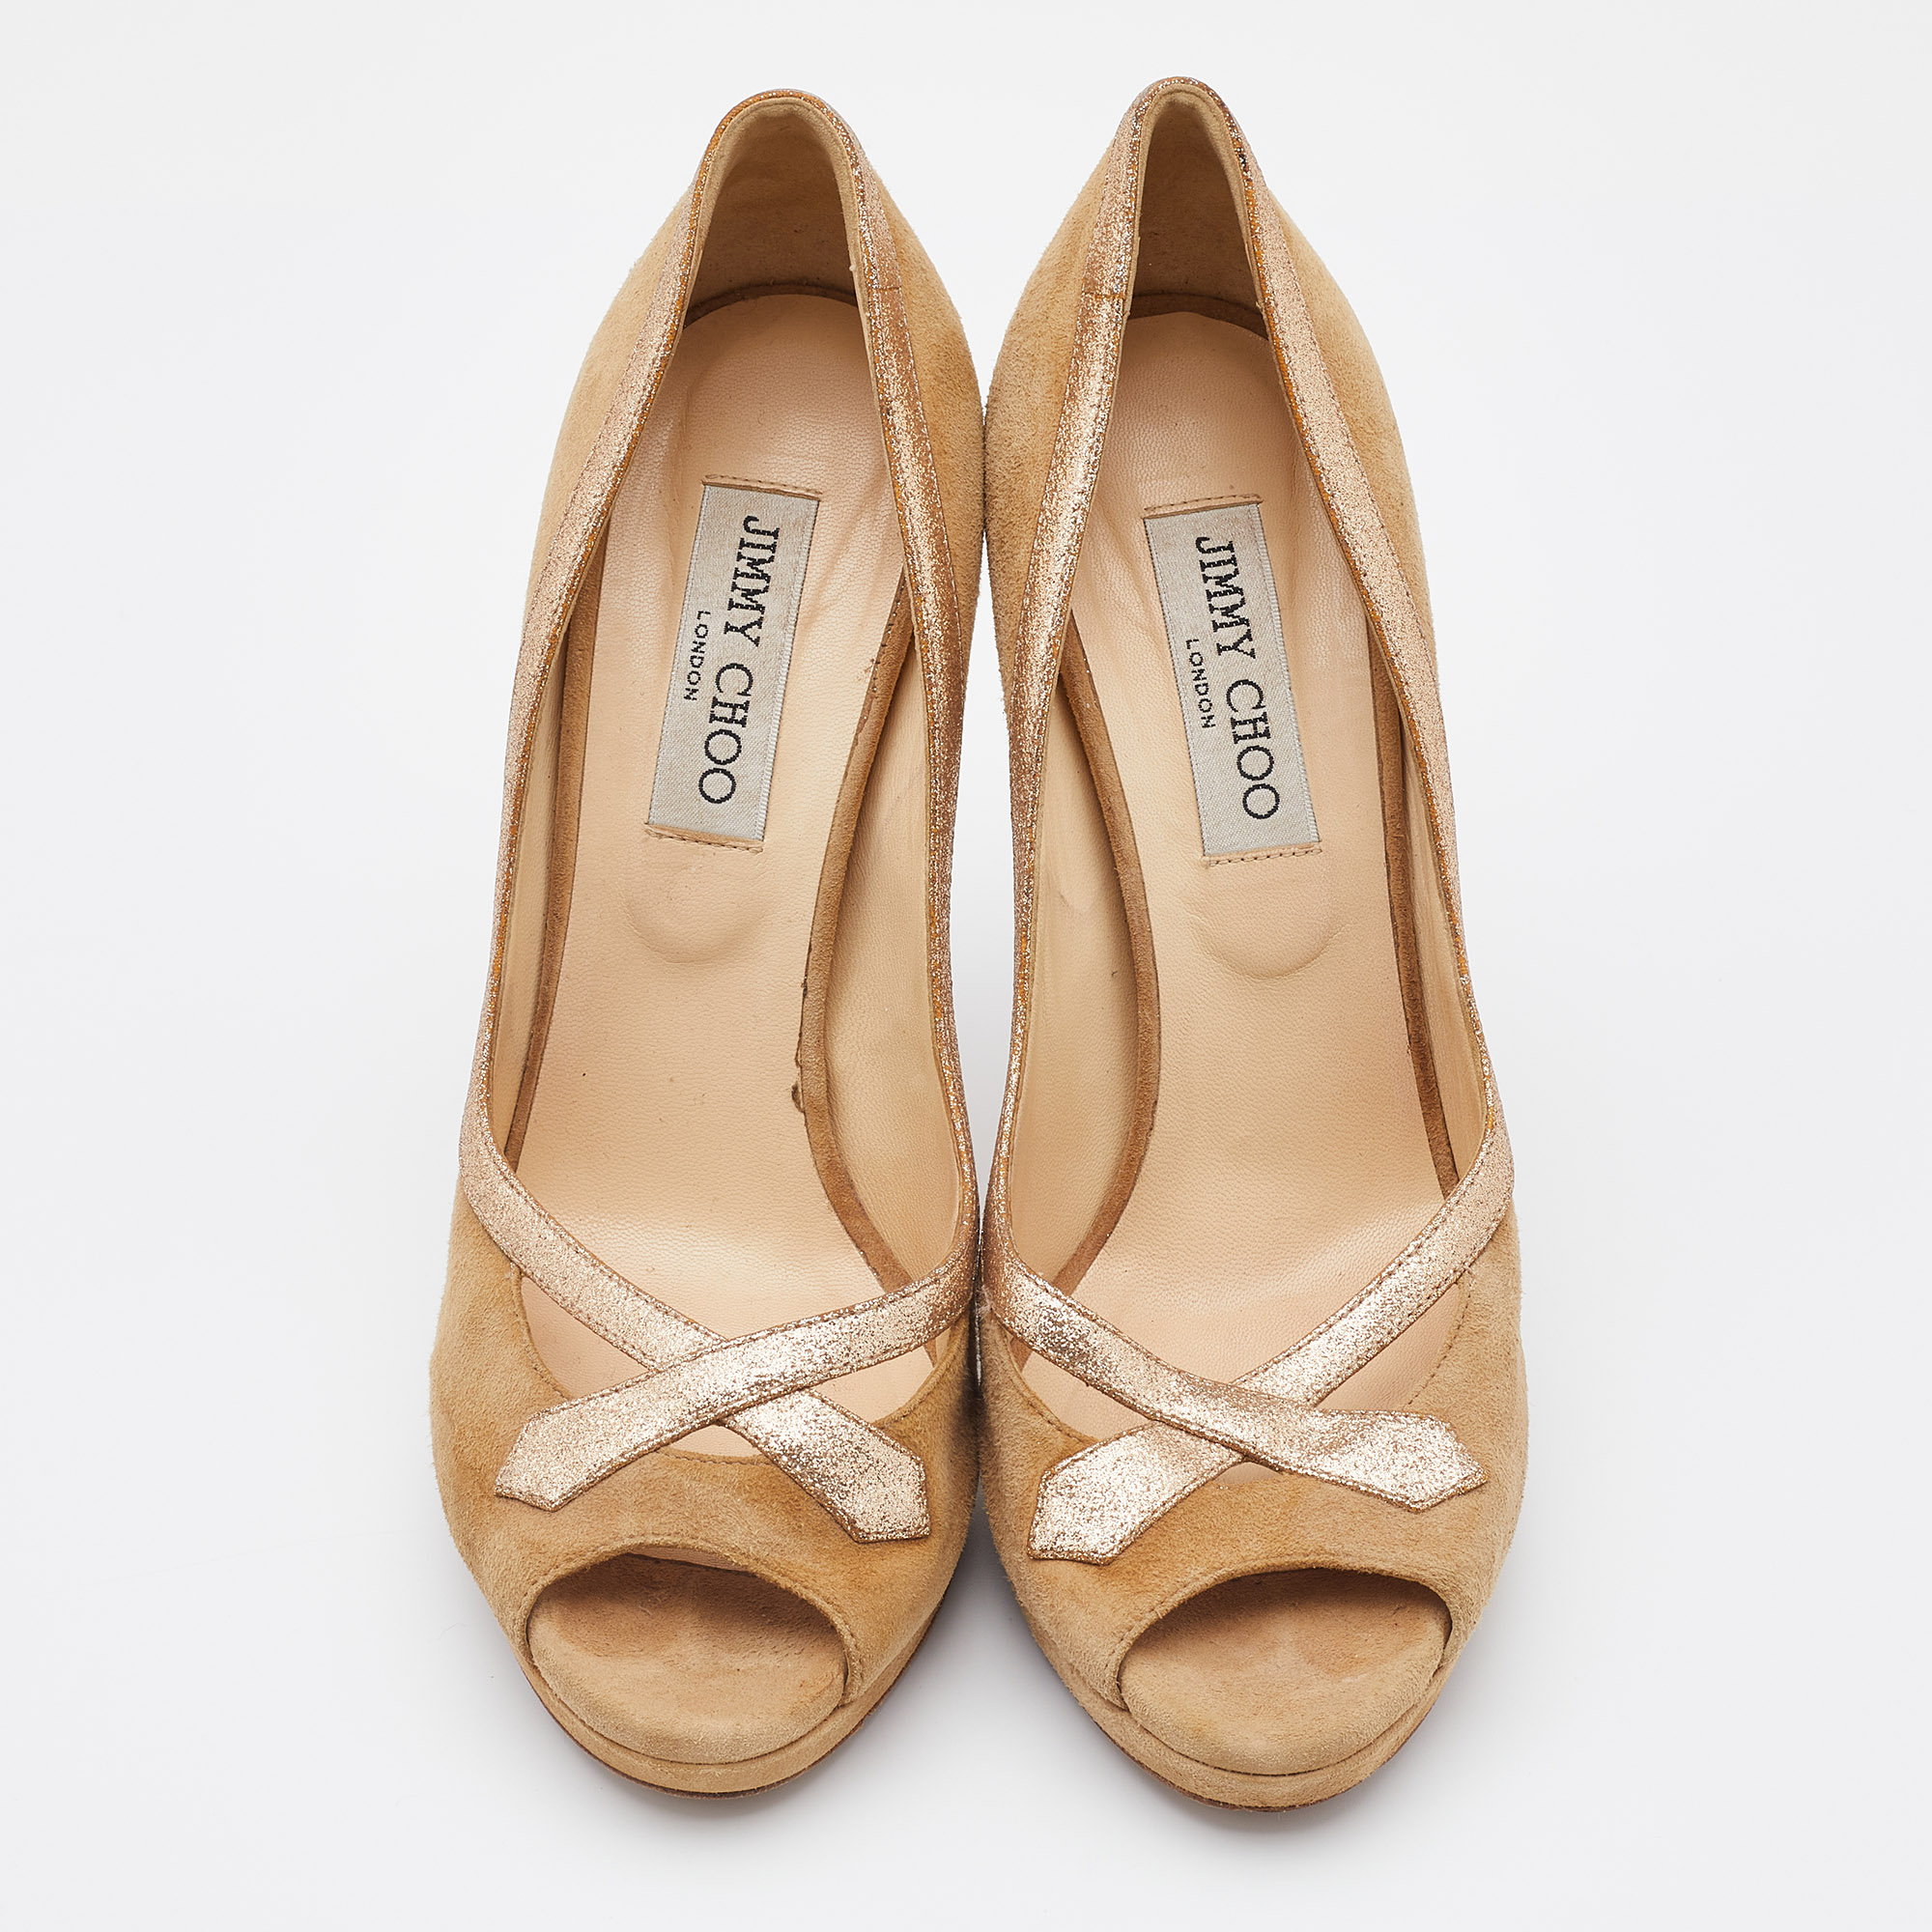 Jimmy Choo Beige/Gold Suede And Leather Open Toe Pumps Size 39.5